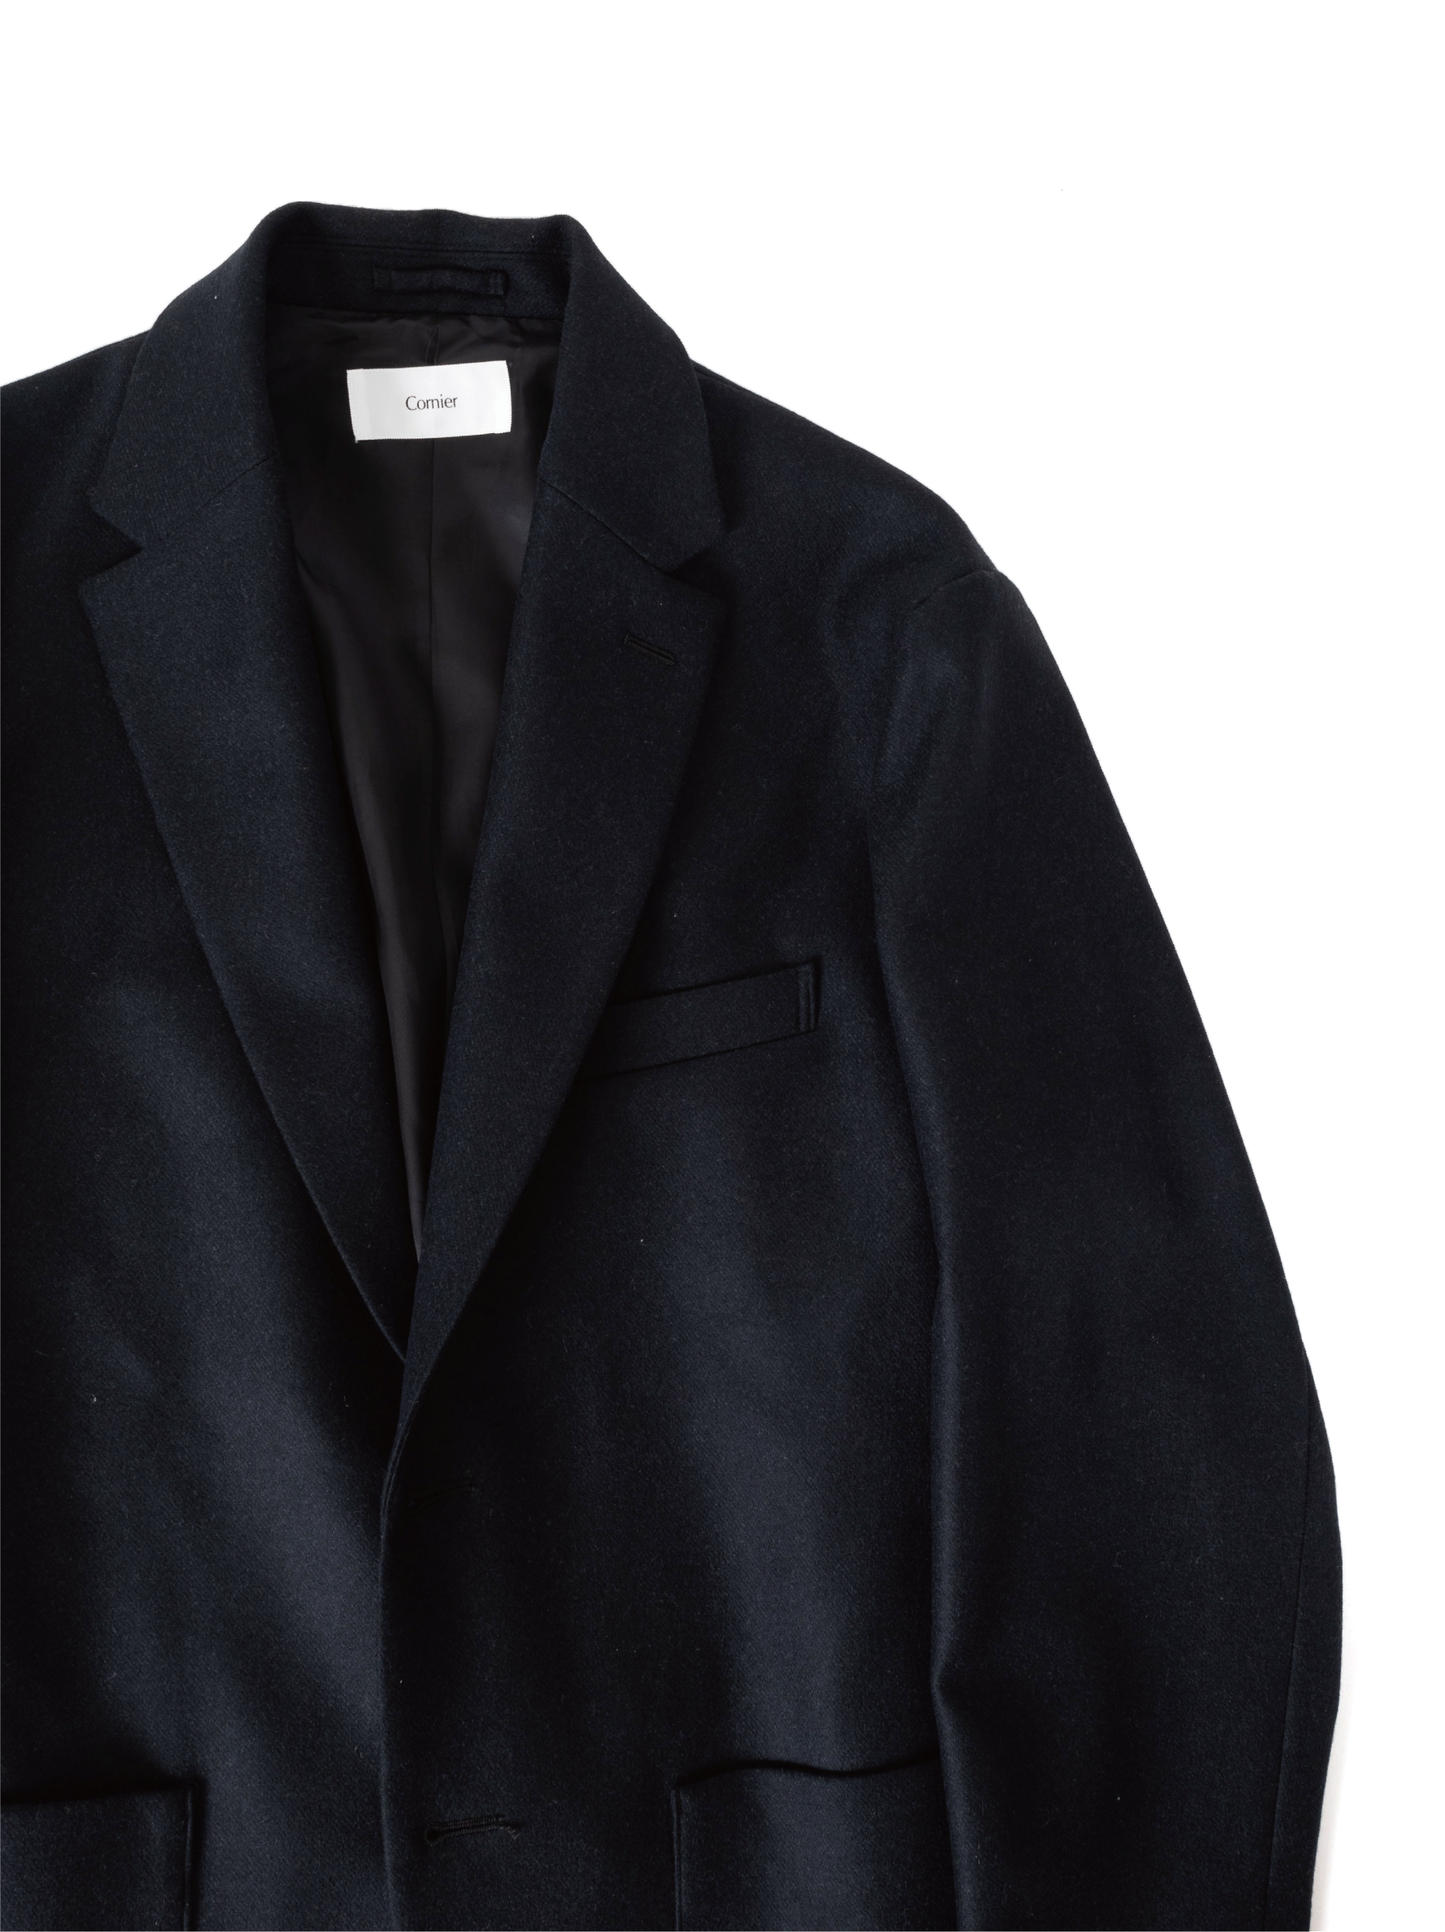 WOOL/CASHMERE COLLEGE FLANNEL TAILORED JACKET｜BLACK